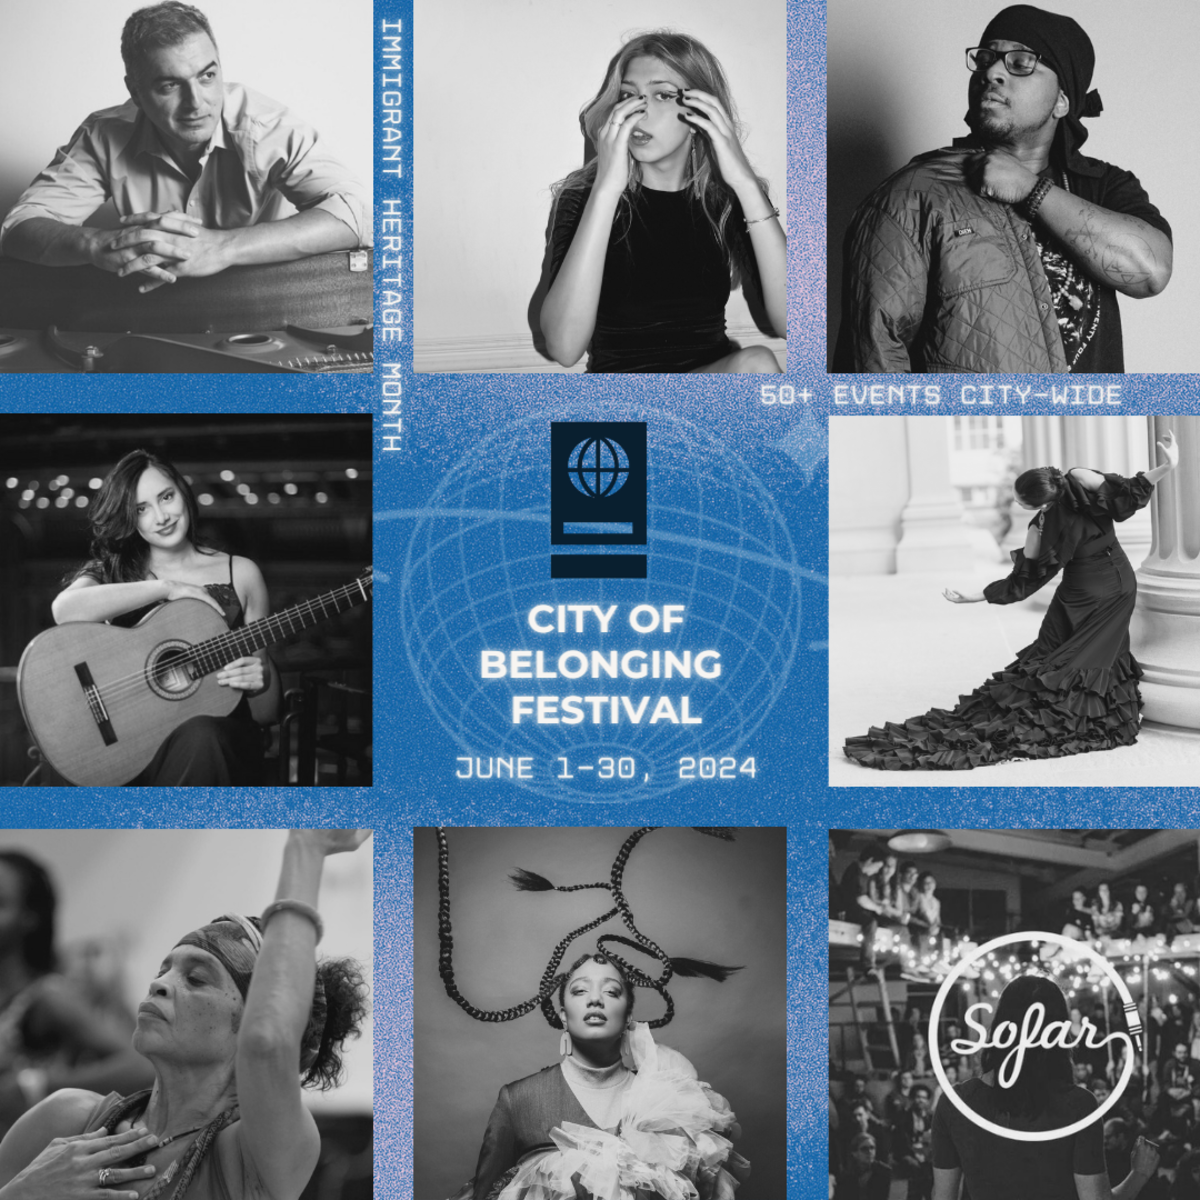 Grid of photos with the text "City of Belonging Festival: June 1-30 2024"